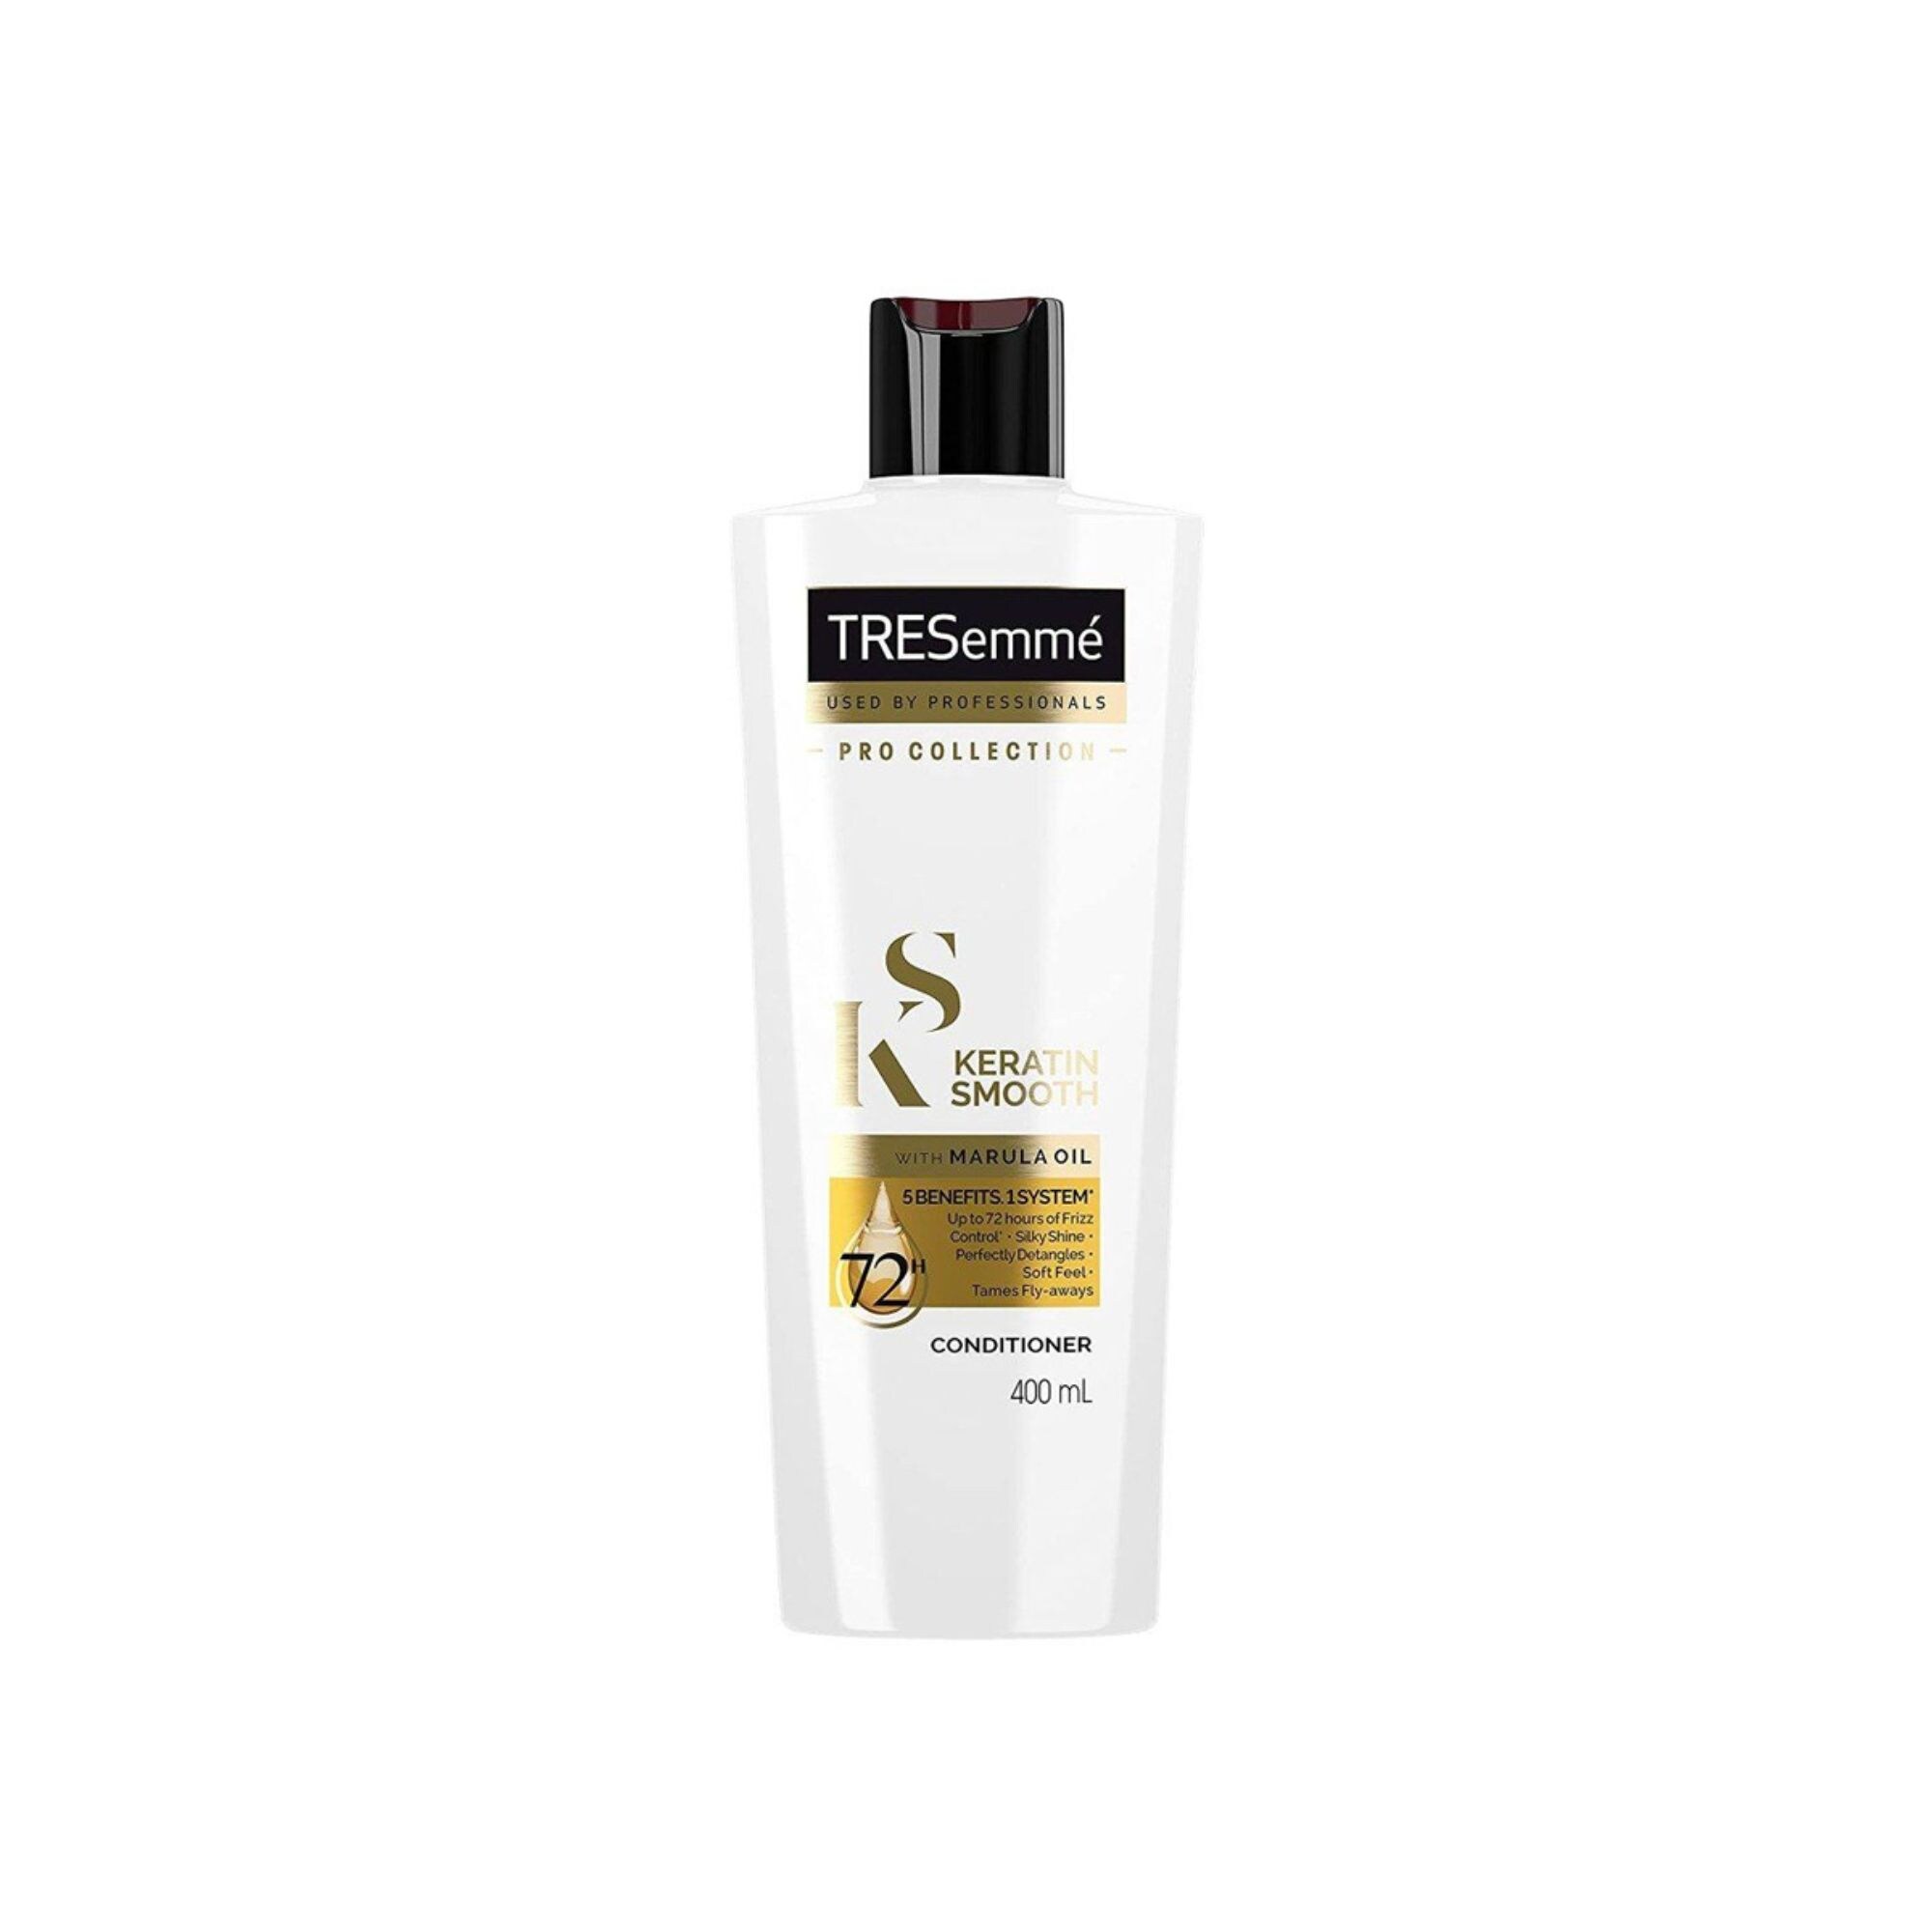 Tresemme Pro Collection Keratin Smooth Conditioner, 400ml, Carton of 12